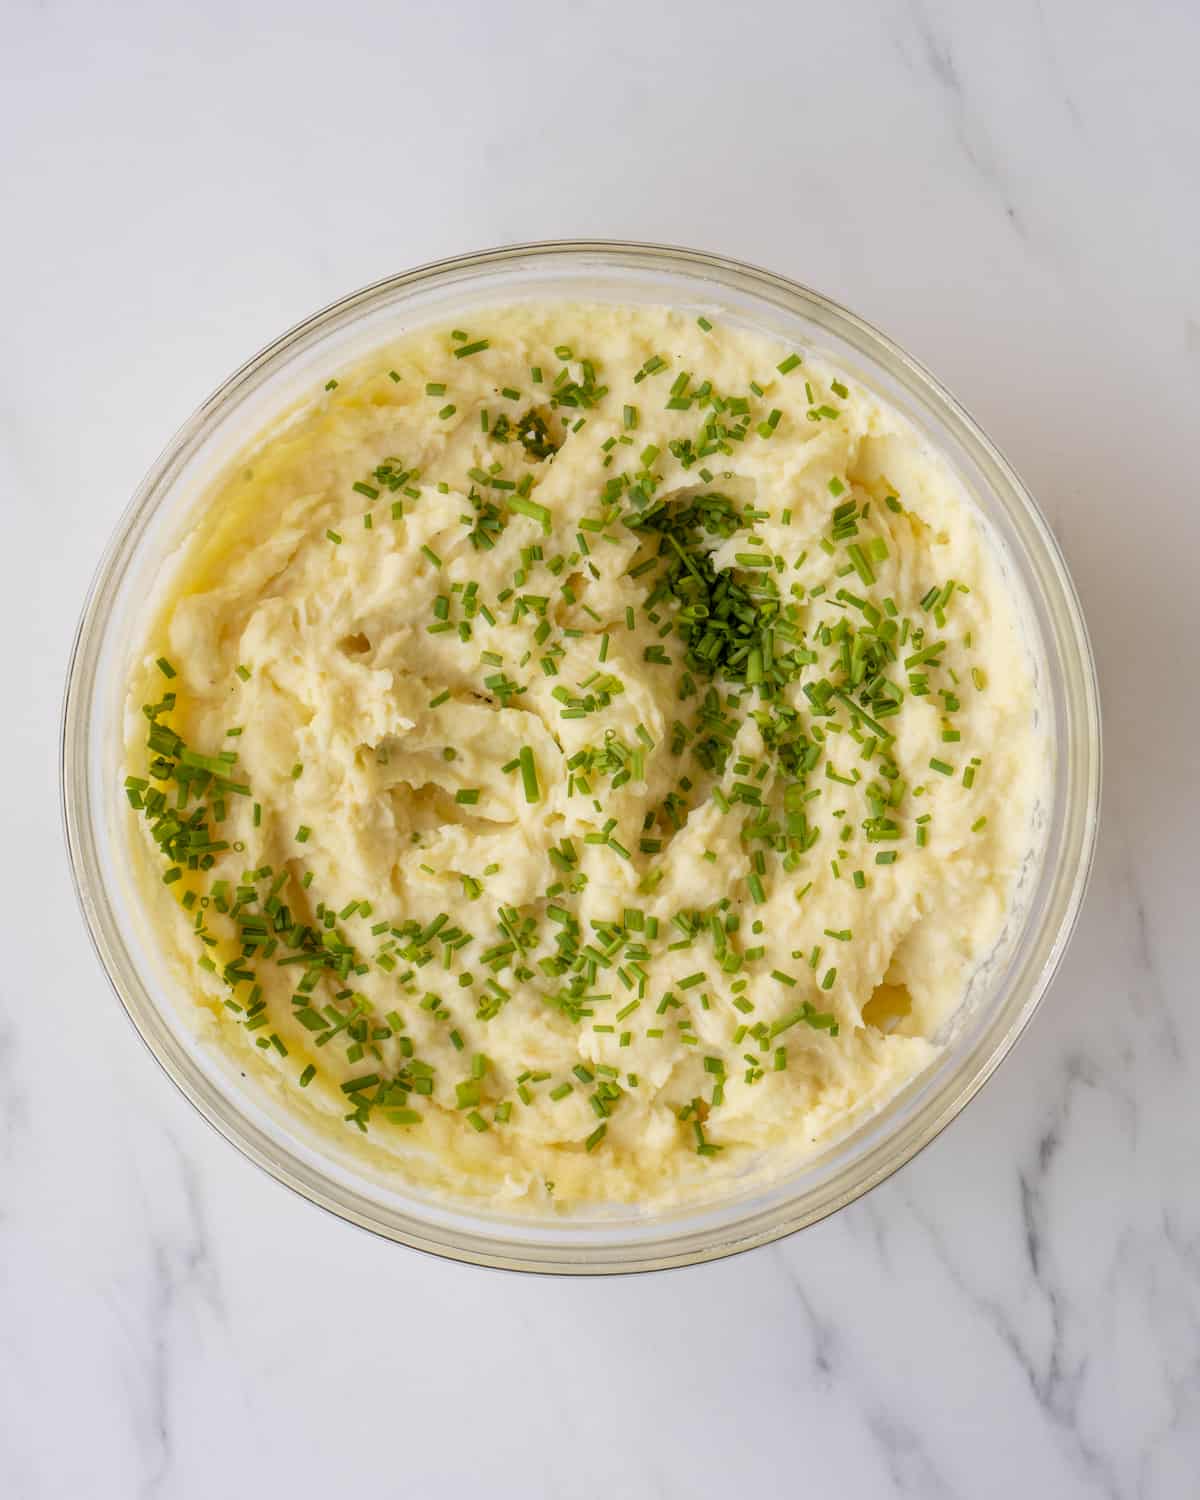 The finished dish of mashed potatoes sitting in a glass bowl with chopped up chives.  